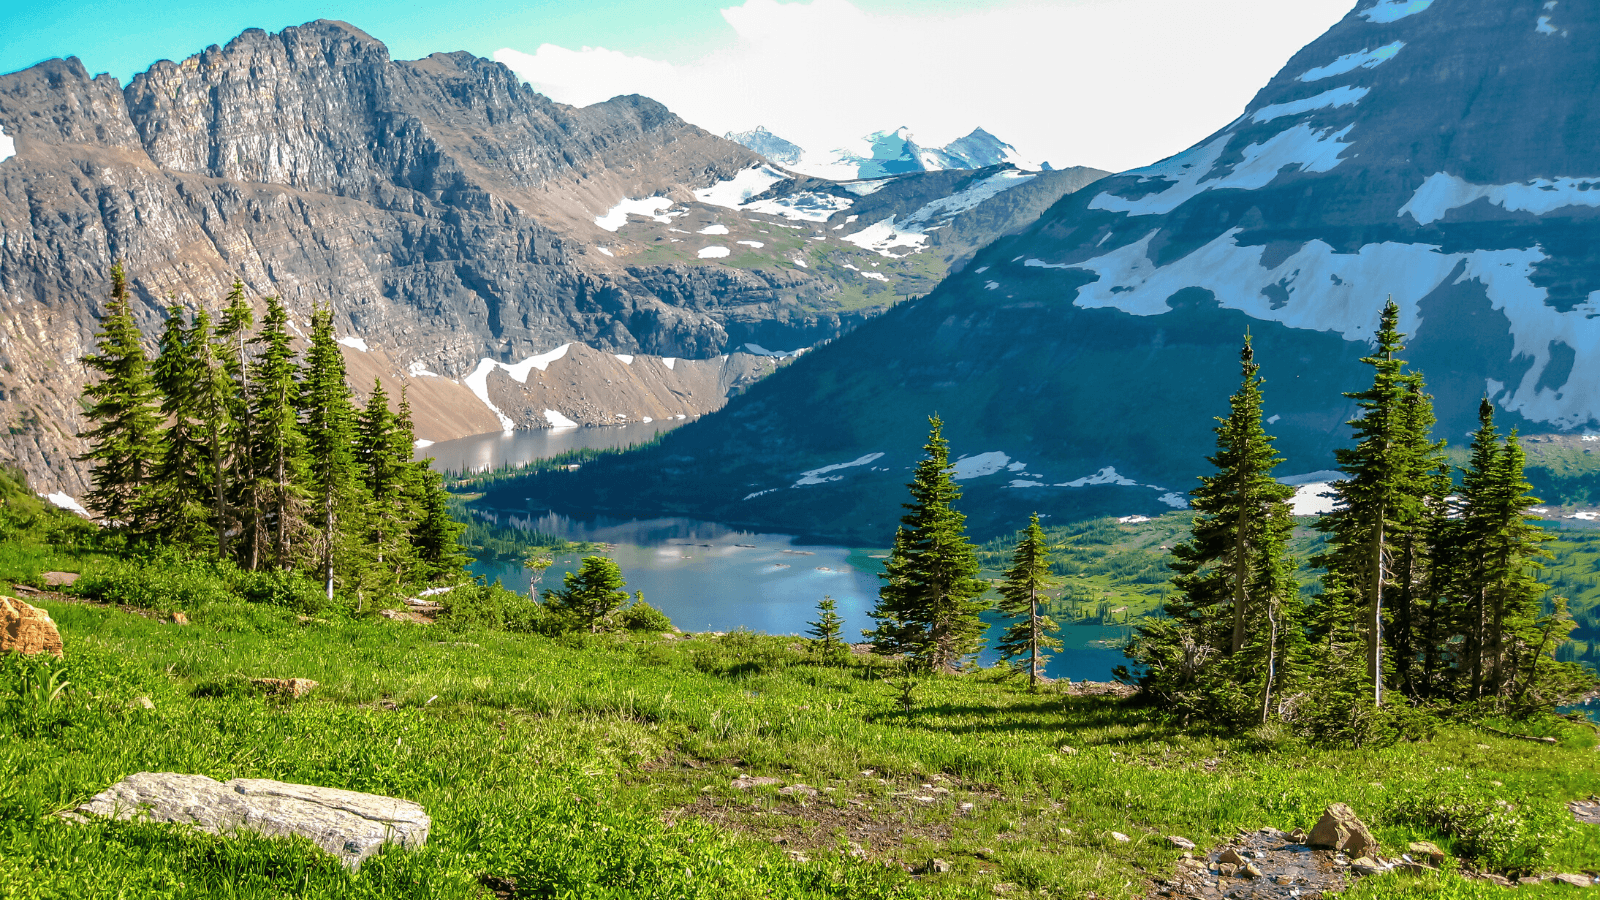 Sunny mountain valley in Glacier National Park with lake